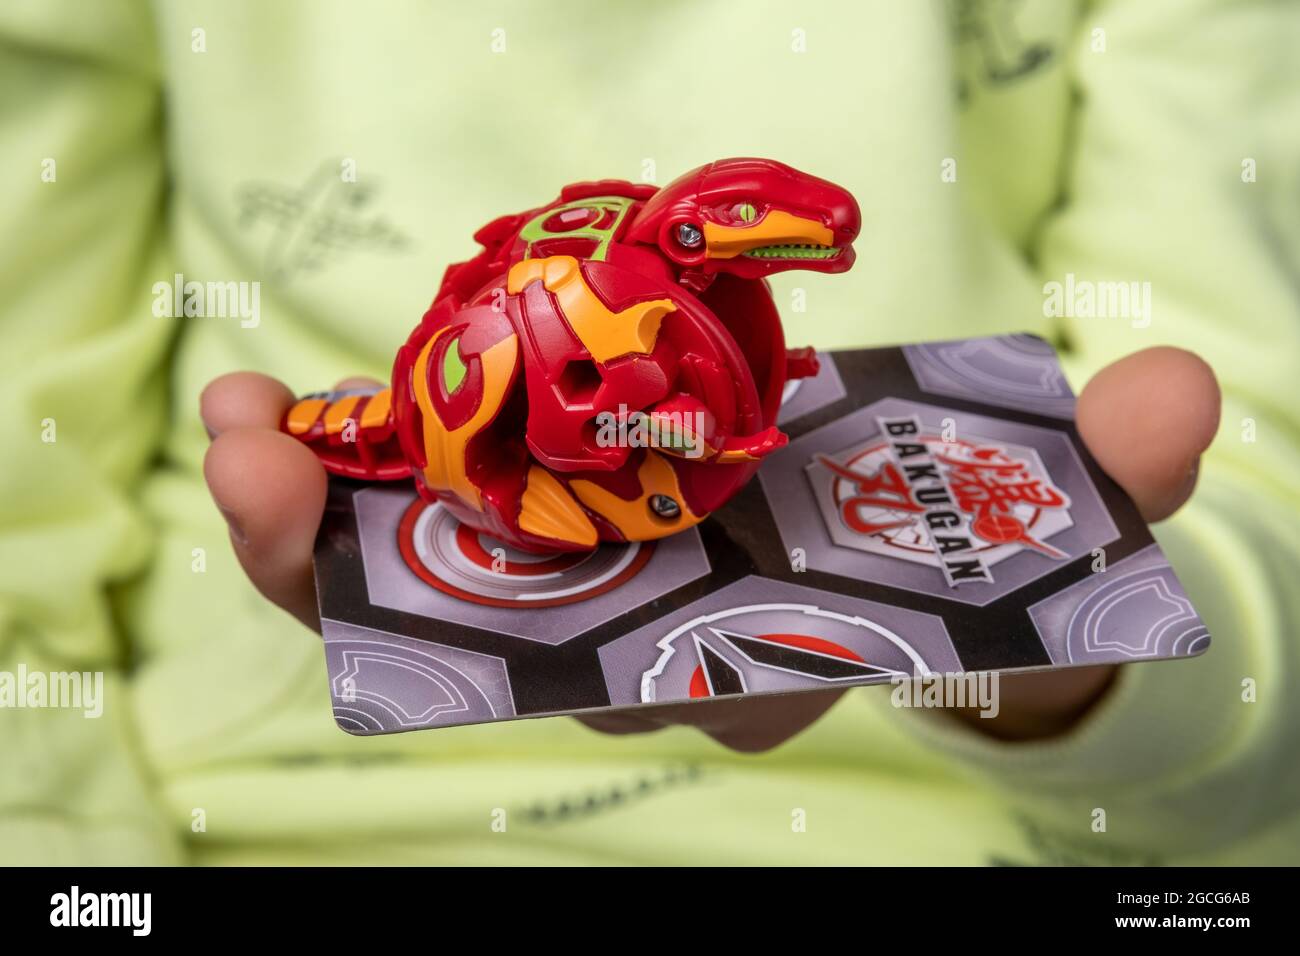 Bakugan Ball toy. Toy transformed in a dragon shape, hold in child's hand  with magnetic card. Stafford, United Kingdom, August 8, 2021 Stock Photo -  Alamy